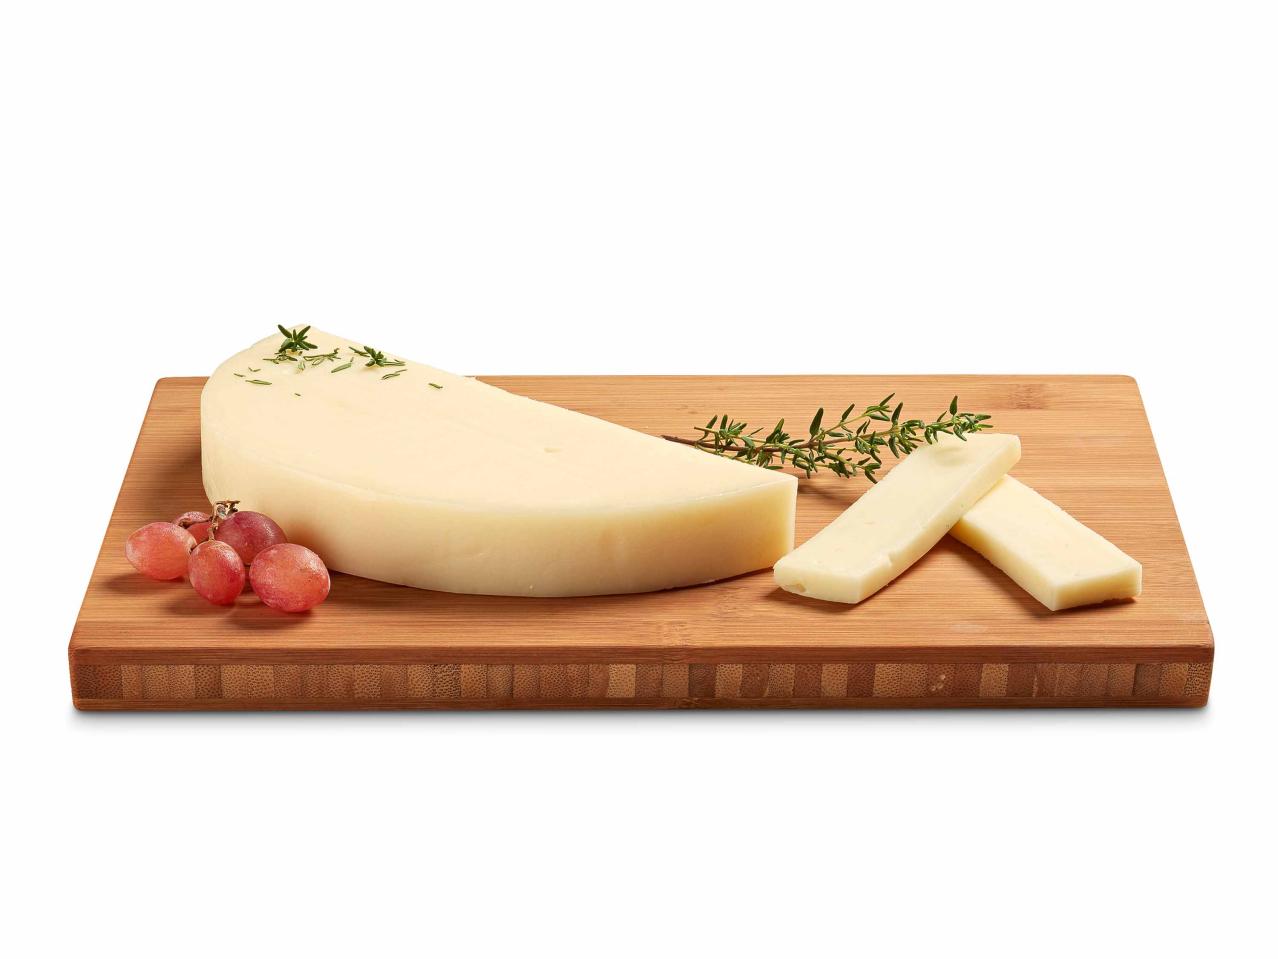 Provolone dolce